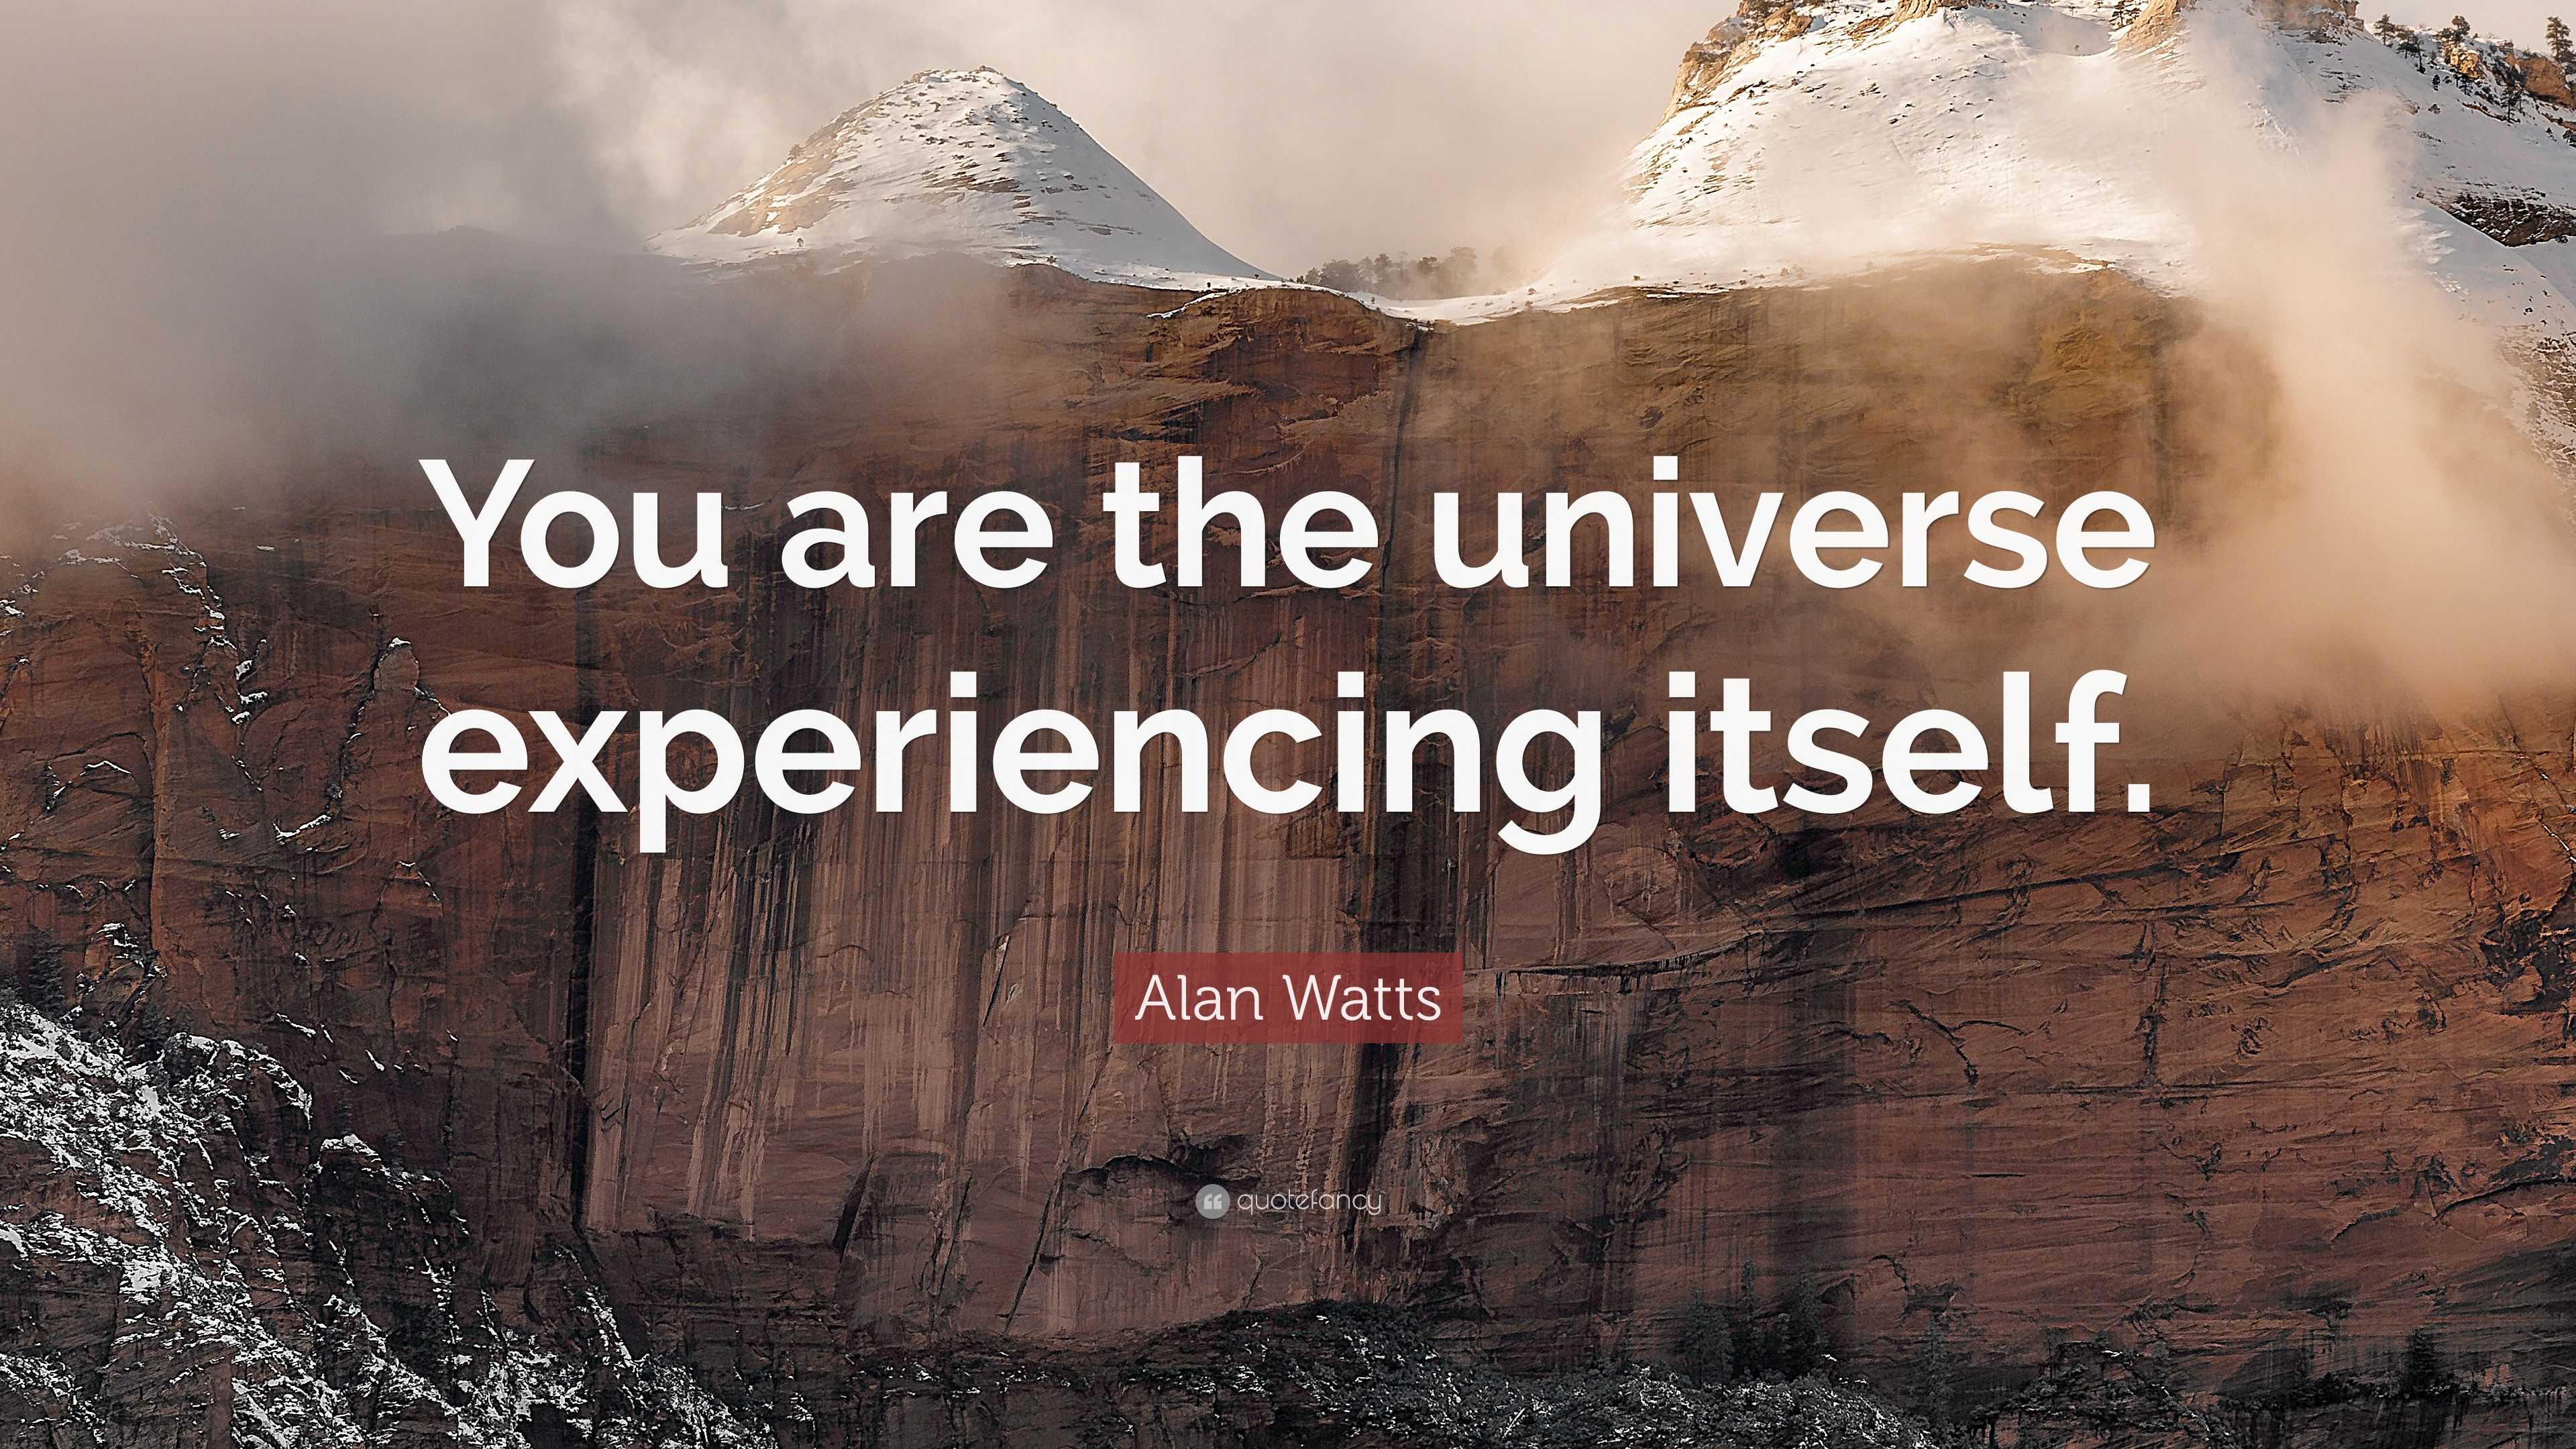 Alan Watts Quote: "You are the universe experiencing itself." (18 wallpapers) - Quotefancy